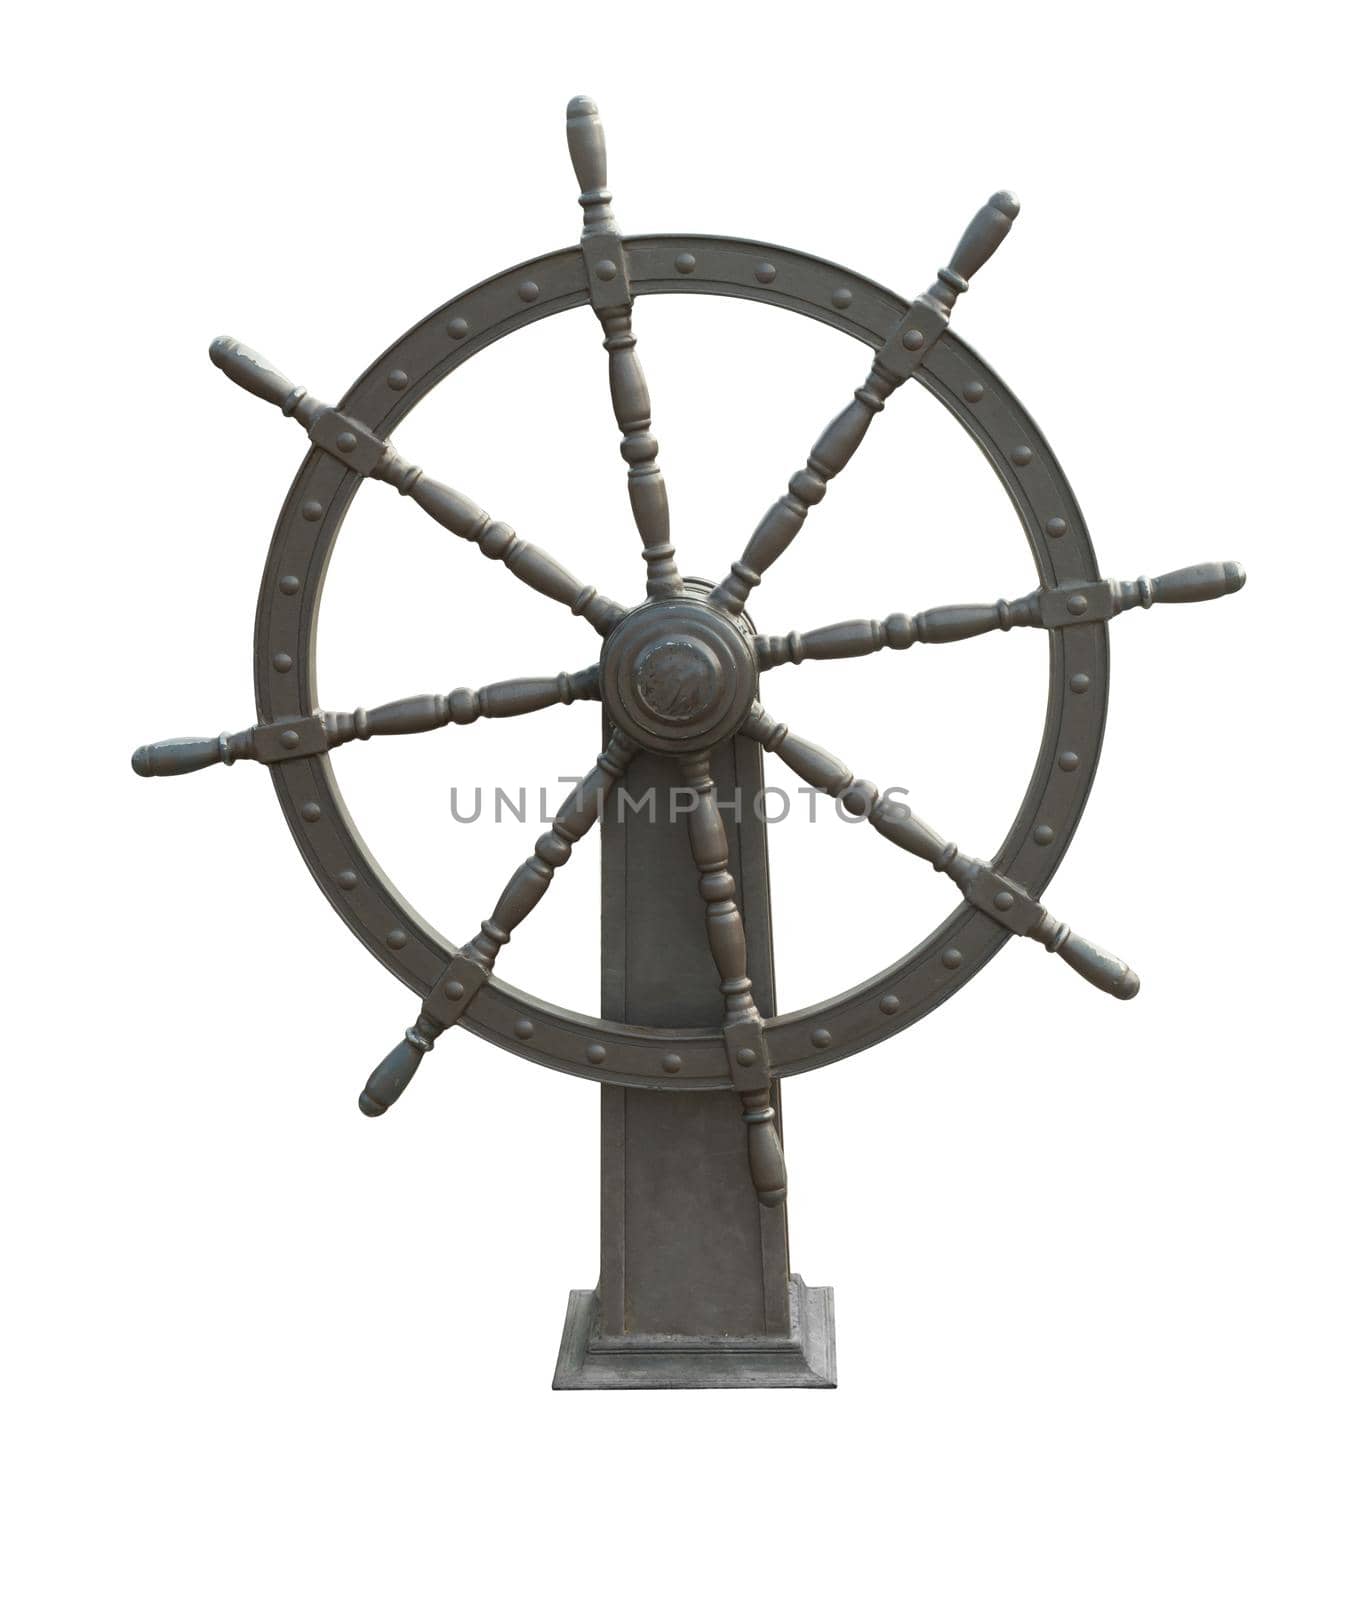 Ship vintage steering wheel on white background isolated